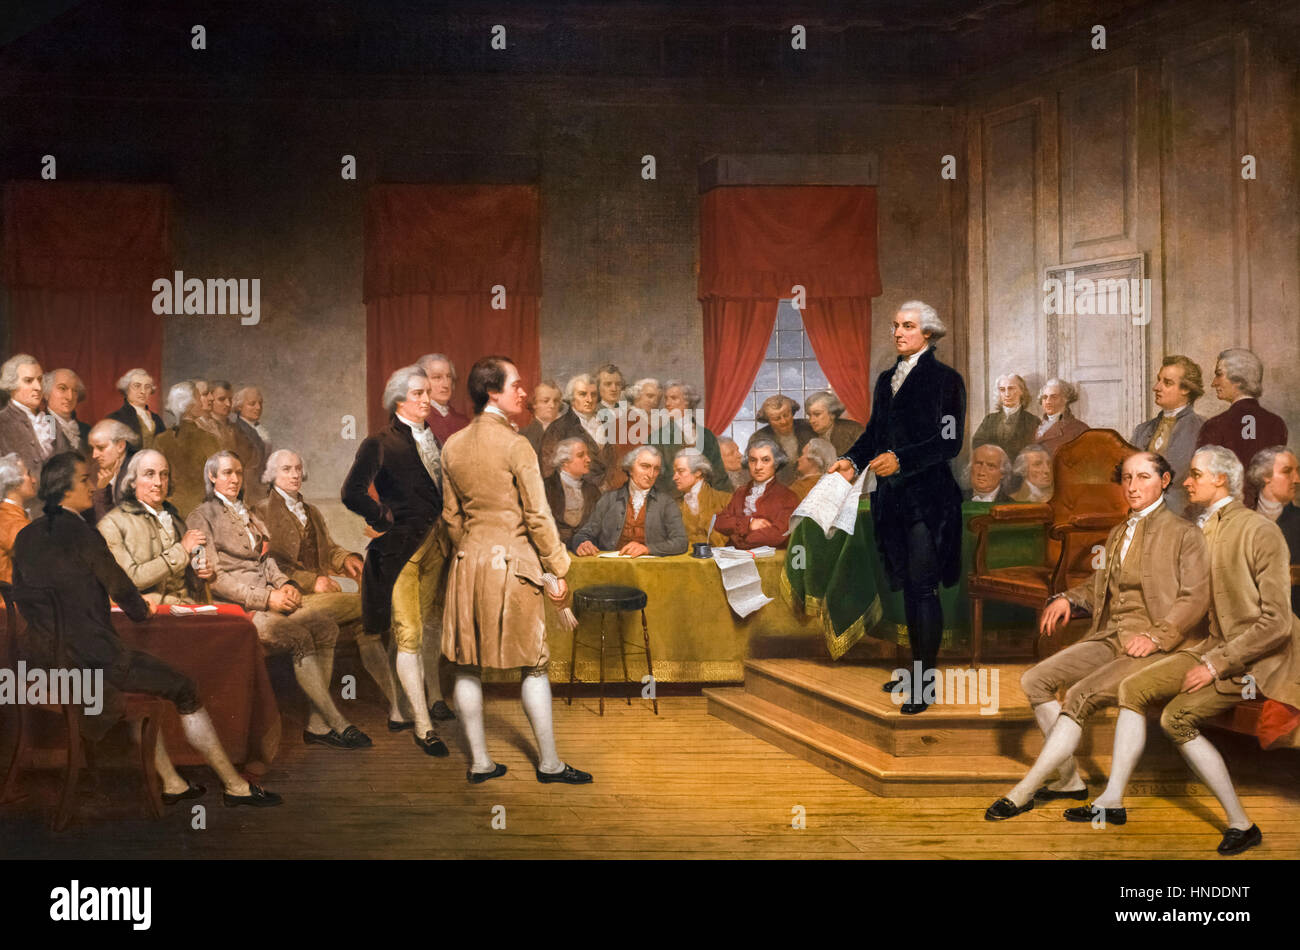 George Washington at the signing of the US Constitution. Painting entitled 'Washington as Statesman at the Constitutional Convention' by Junius Brutus Stearns, oil on canvas, 1856. The painting shows future President George Washington at the Constitutional Convention which took place from 25th May to 17th September 1787, in Philadelphia, Pennsylvania. The Convention established the Constitution of the United States. Stock Photo